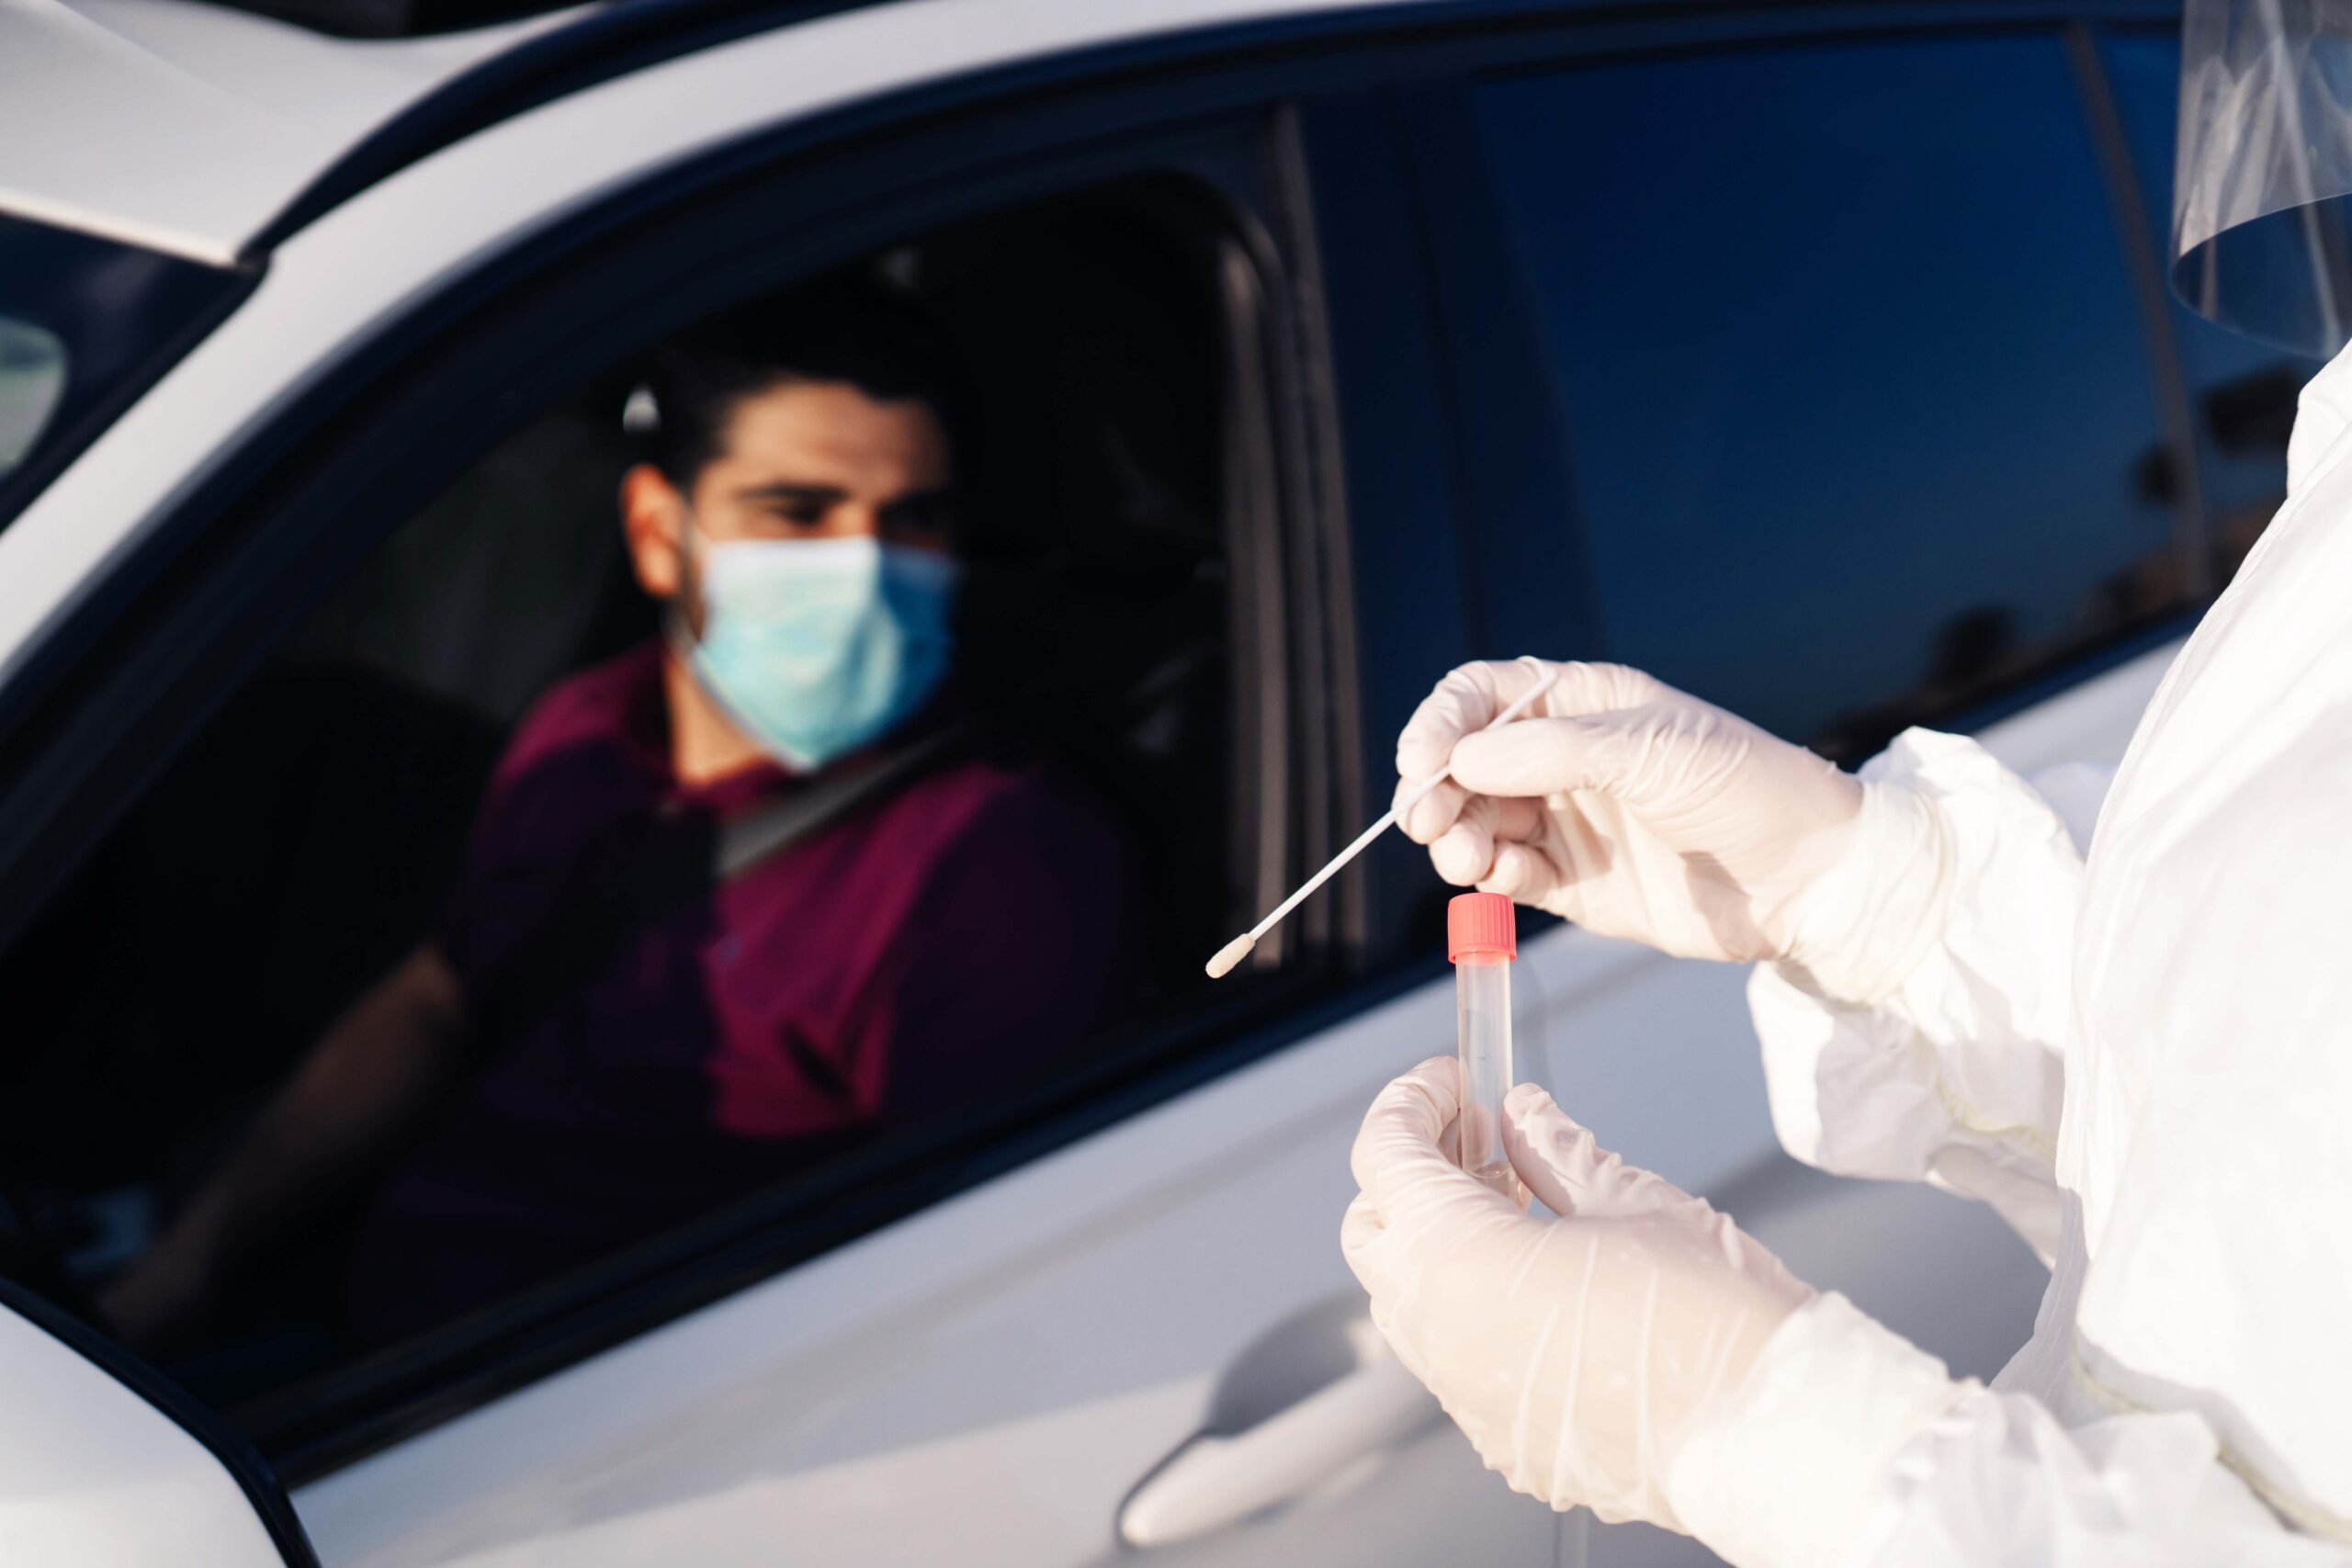 Lab worker collects nasal swab from man driving in a car